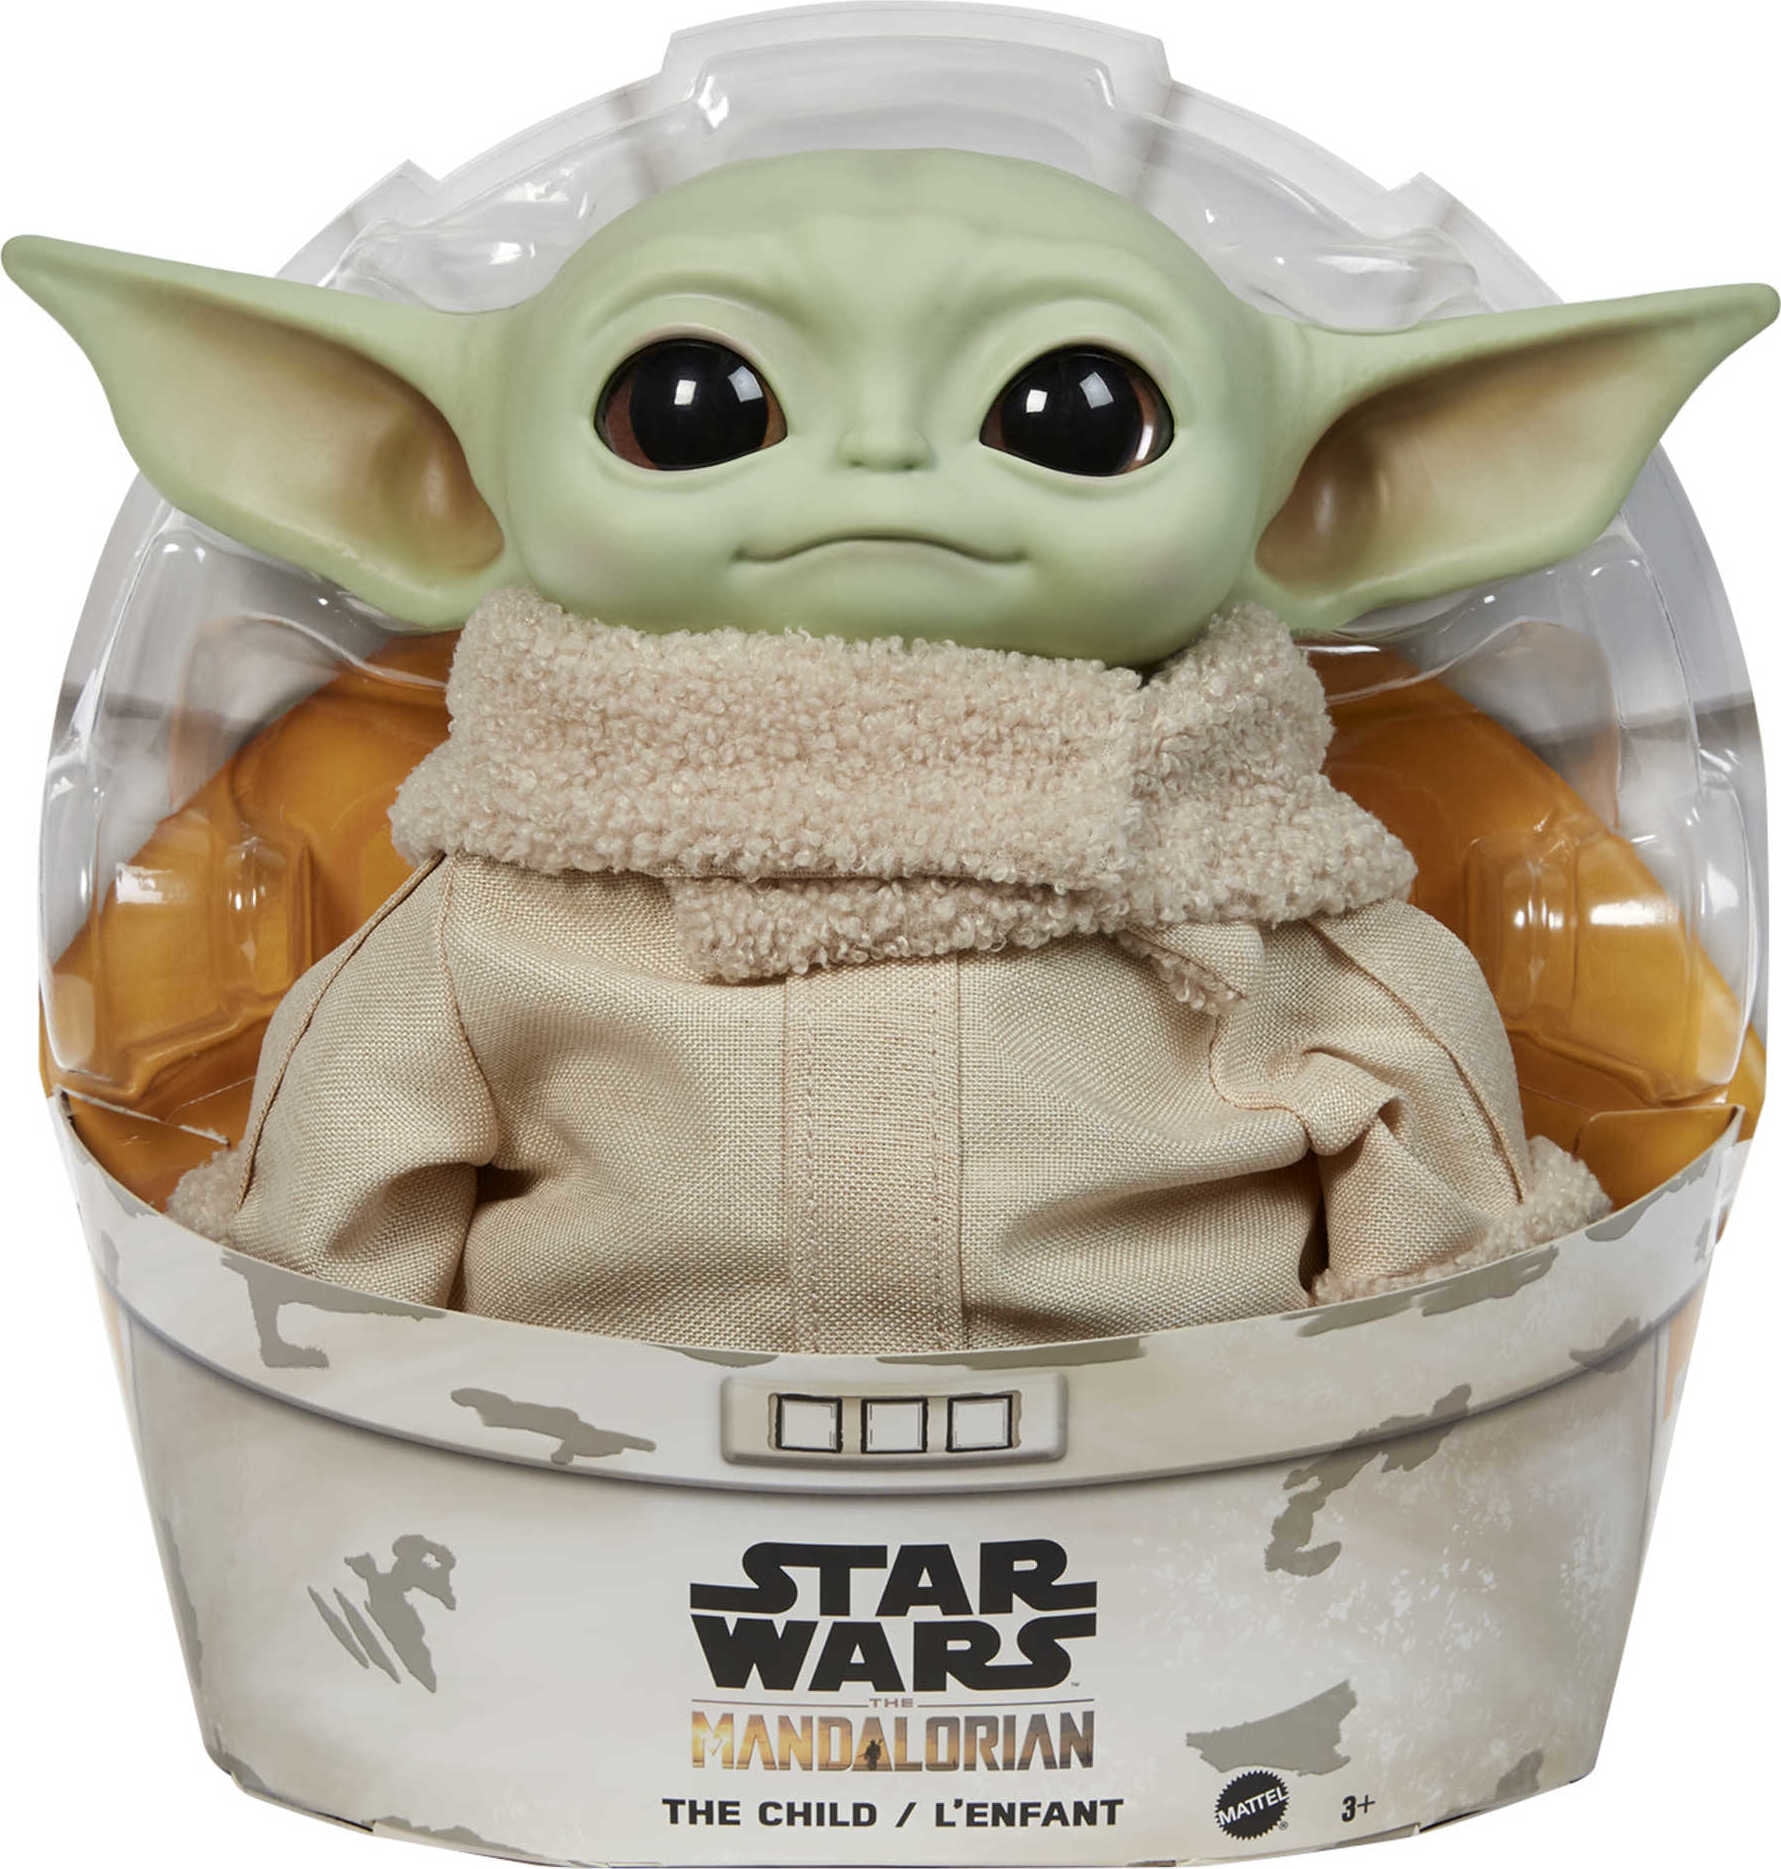 Star Wars Plush Toys, Grogu Soft Doll from The Mandalorian, 11-in Figure -  